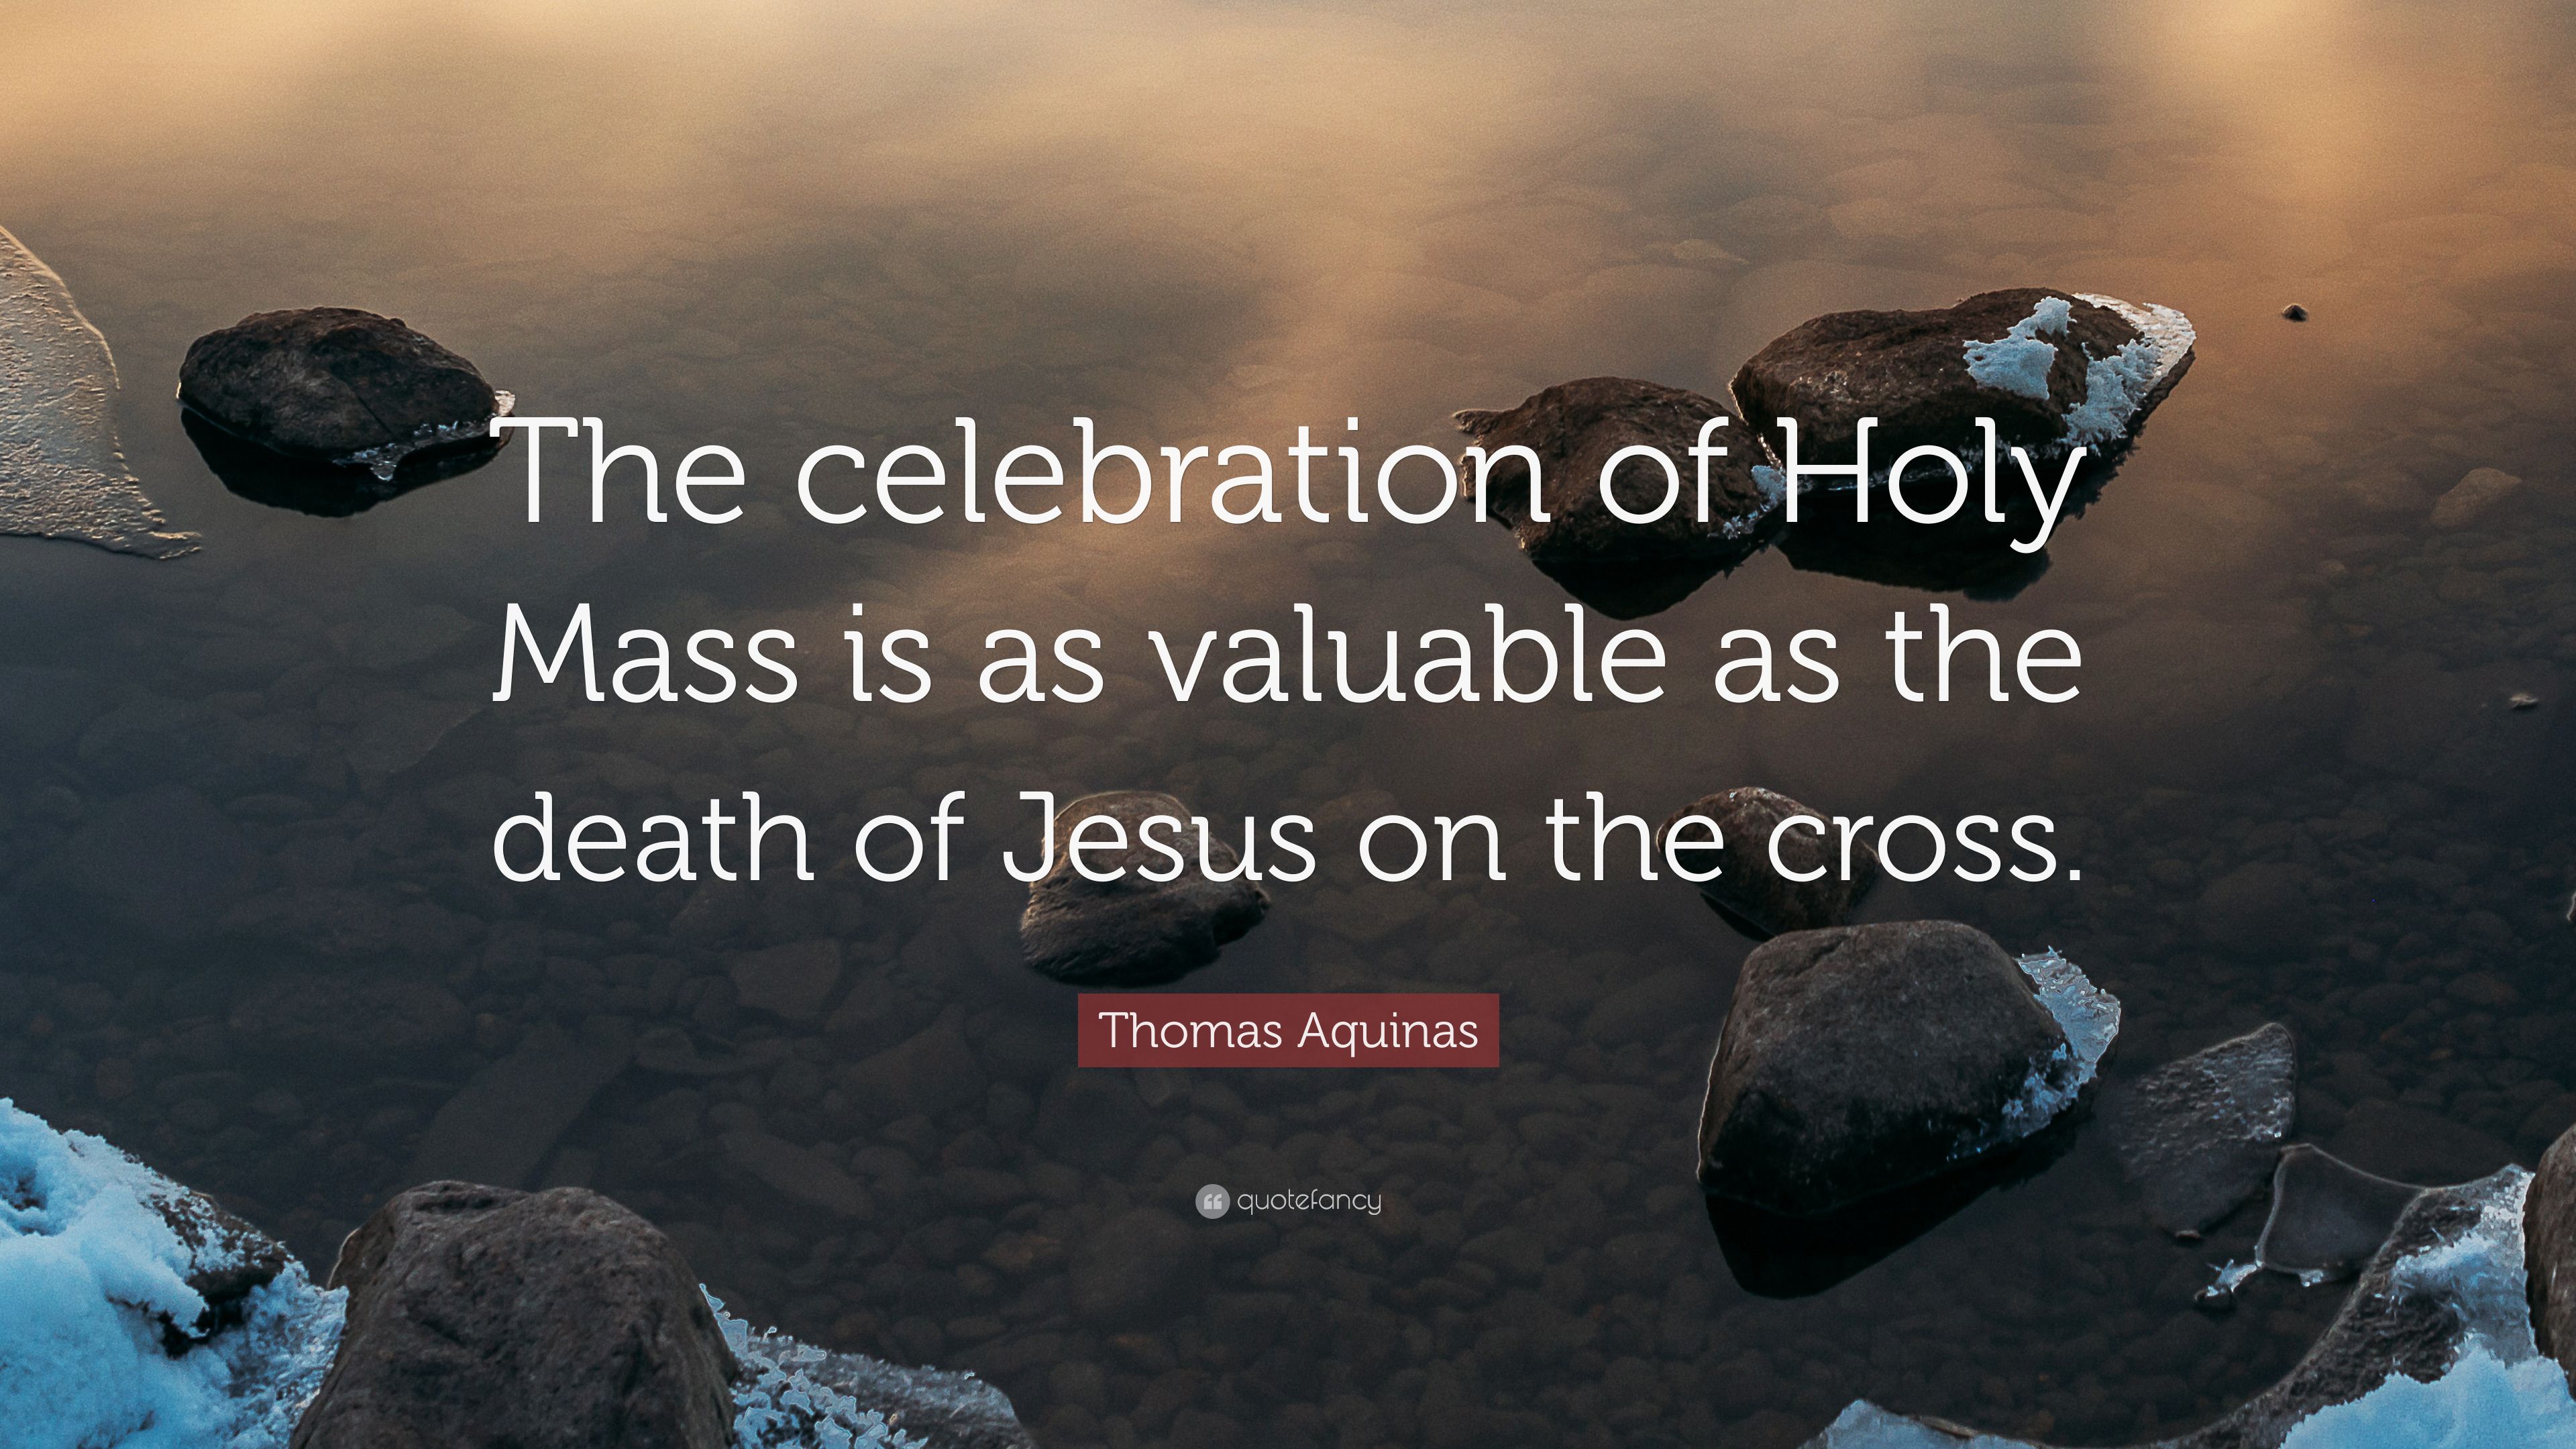 Thomas Aquinas Quote: “The celebration of Holy Mass is as valuable as the death of Jesus on the cross.” (7 wallpaper)